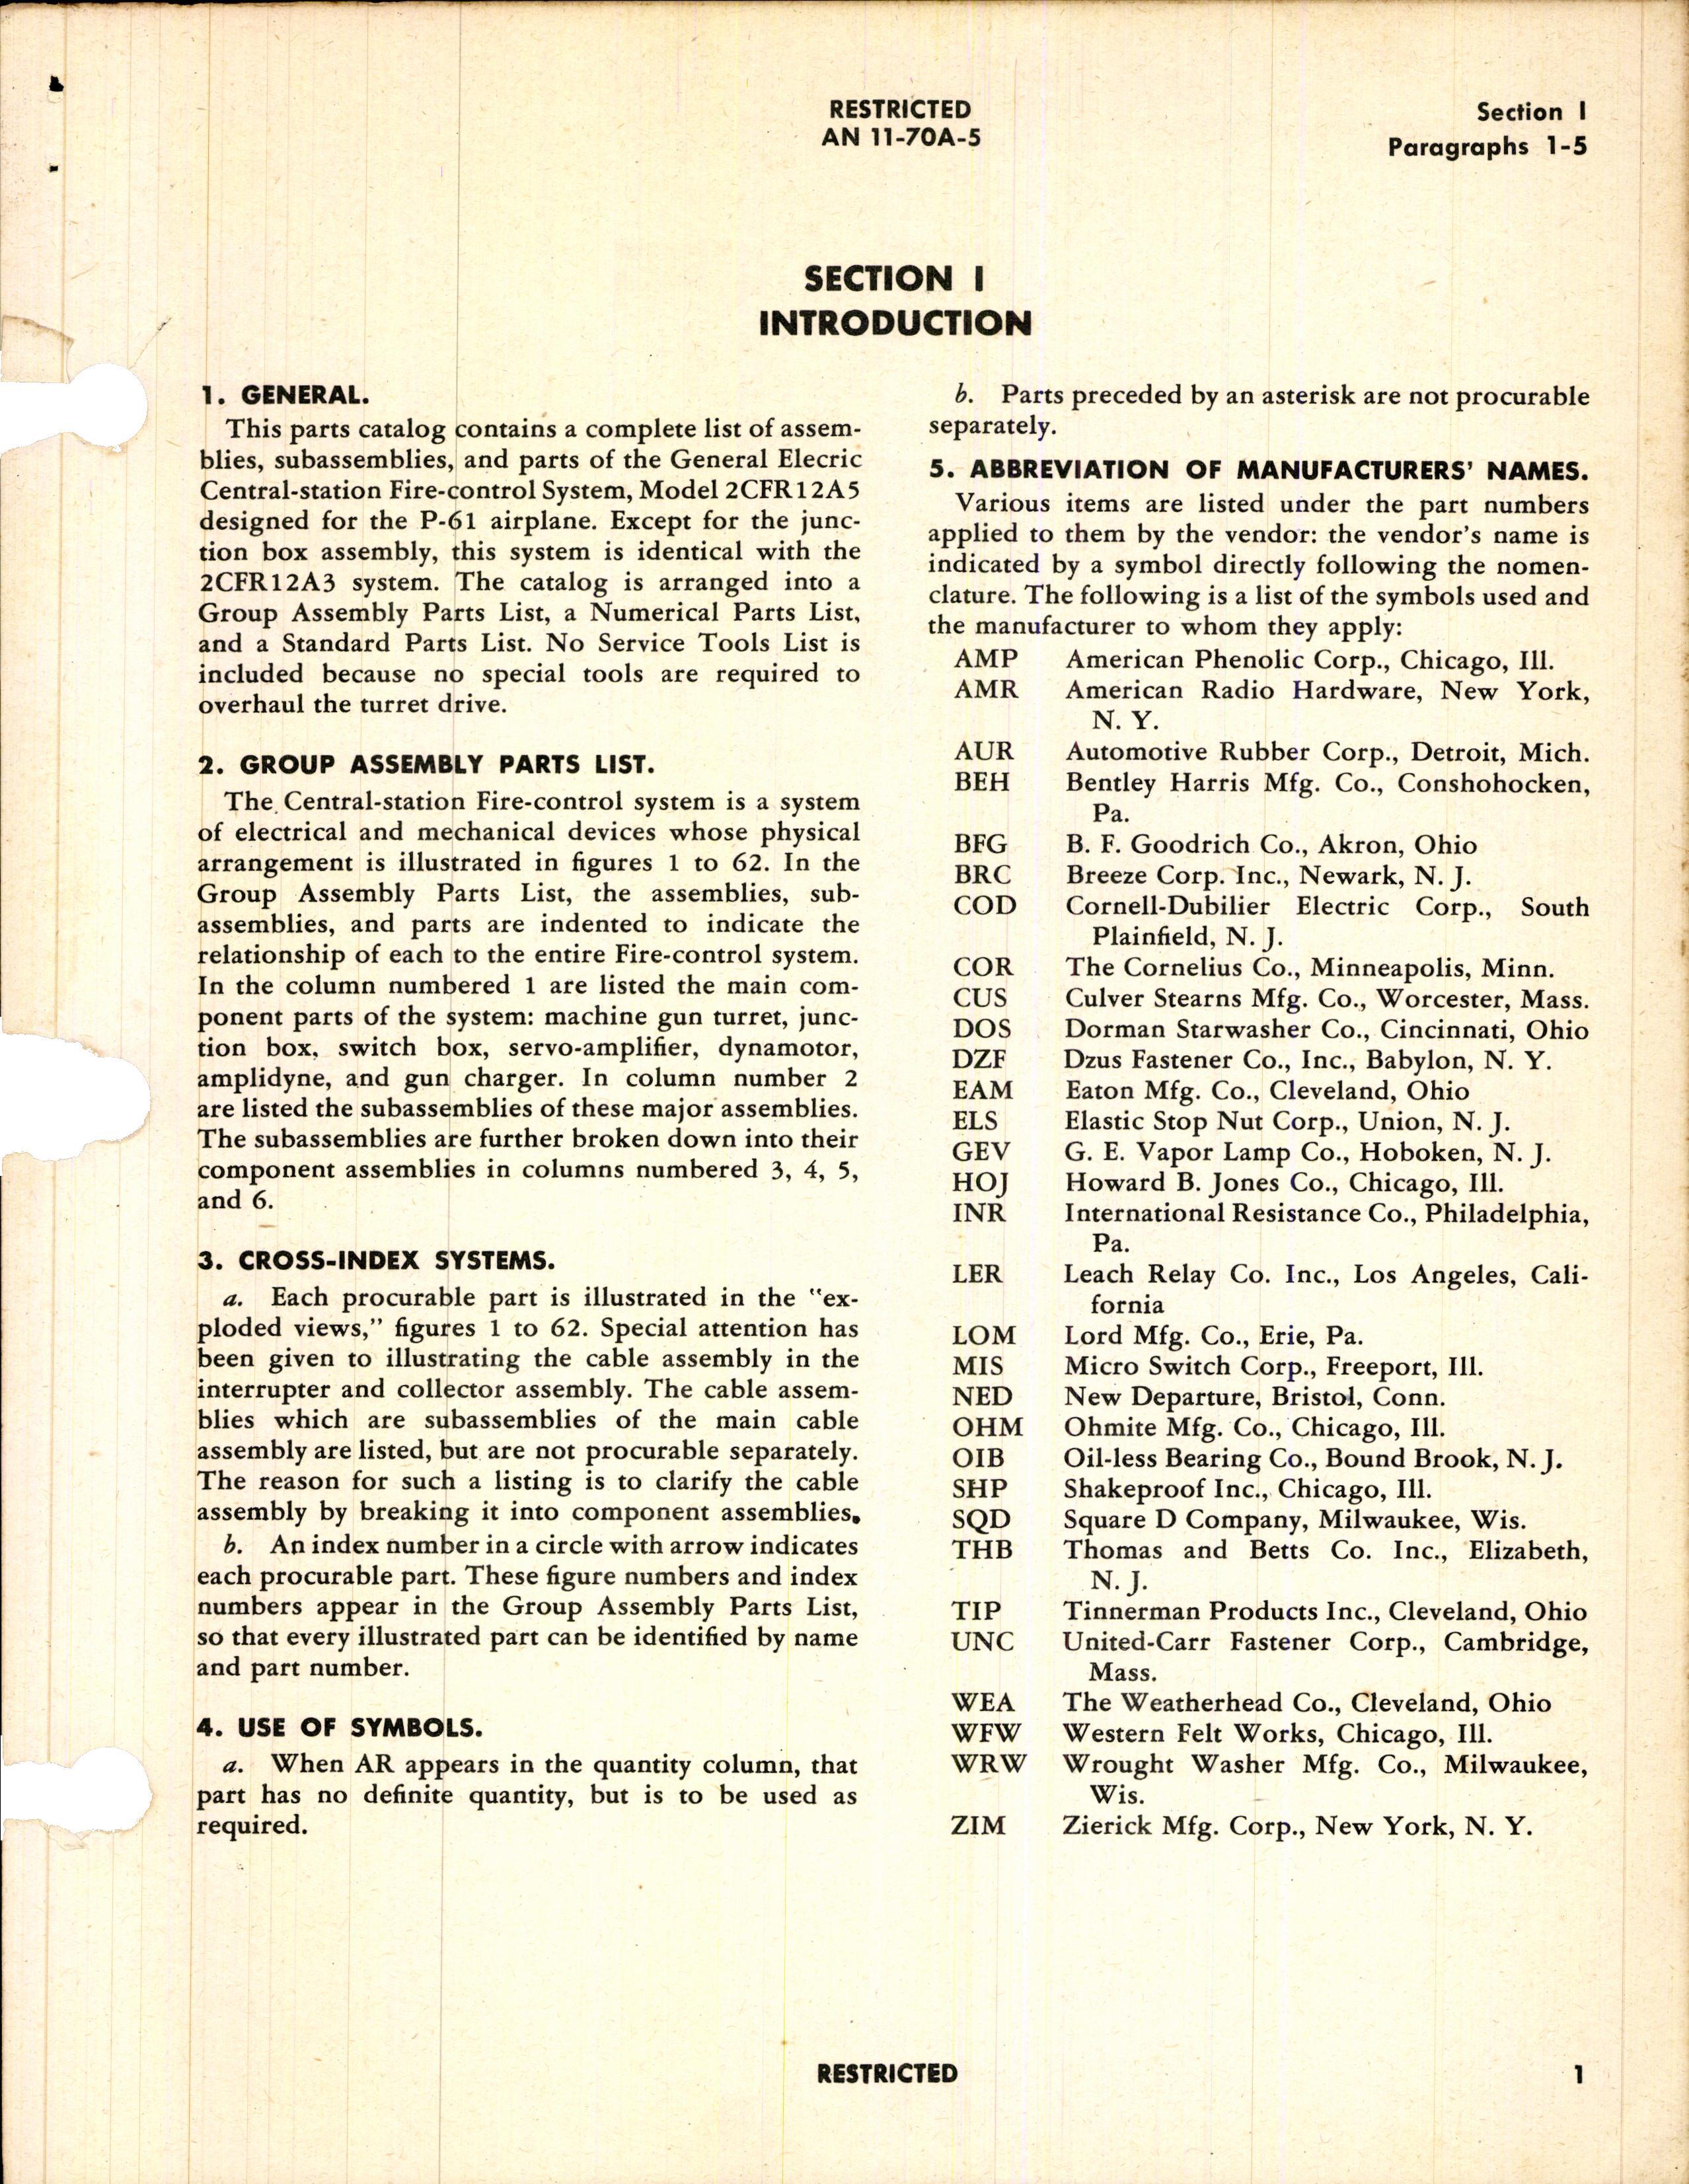 Sample page 5 from AirCorps Library document: Parts Catalog for Central-Station Fire-Control System for P-61 Aircraft